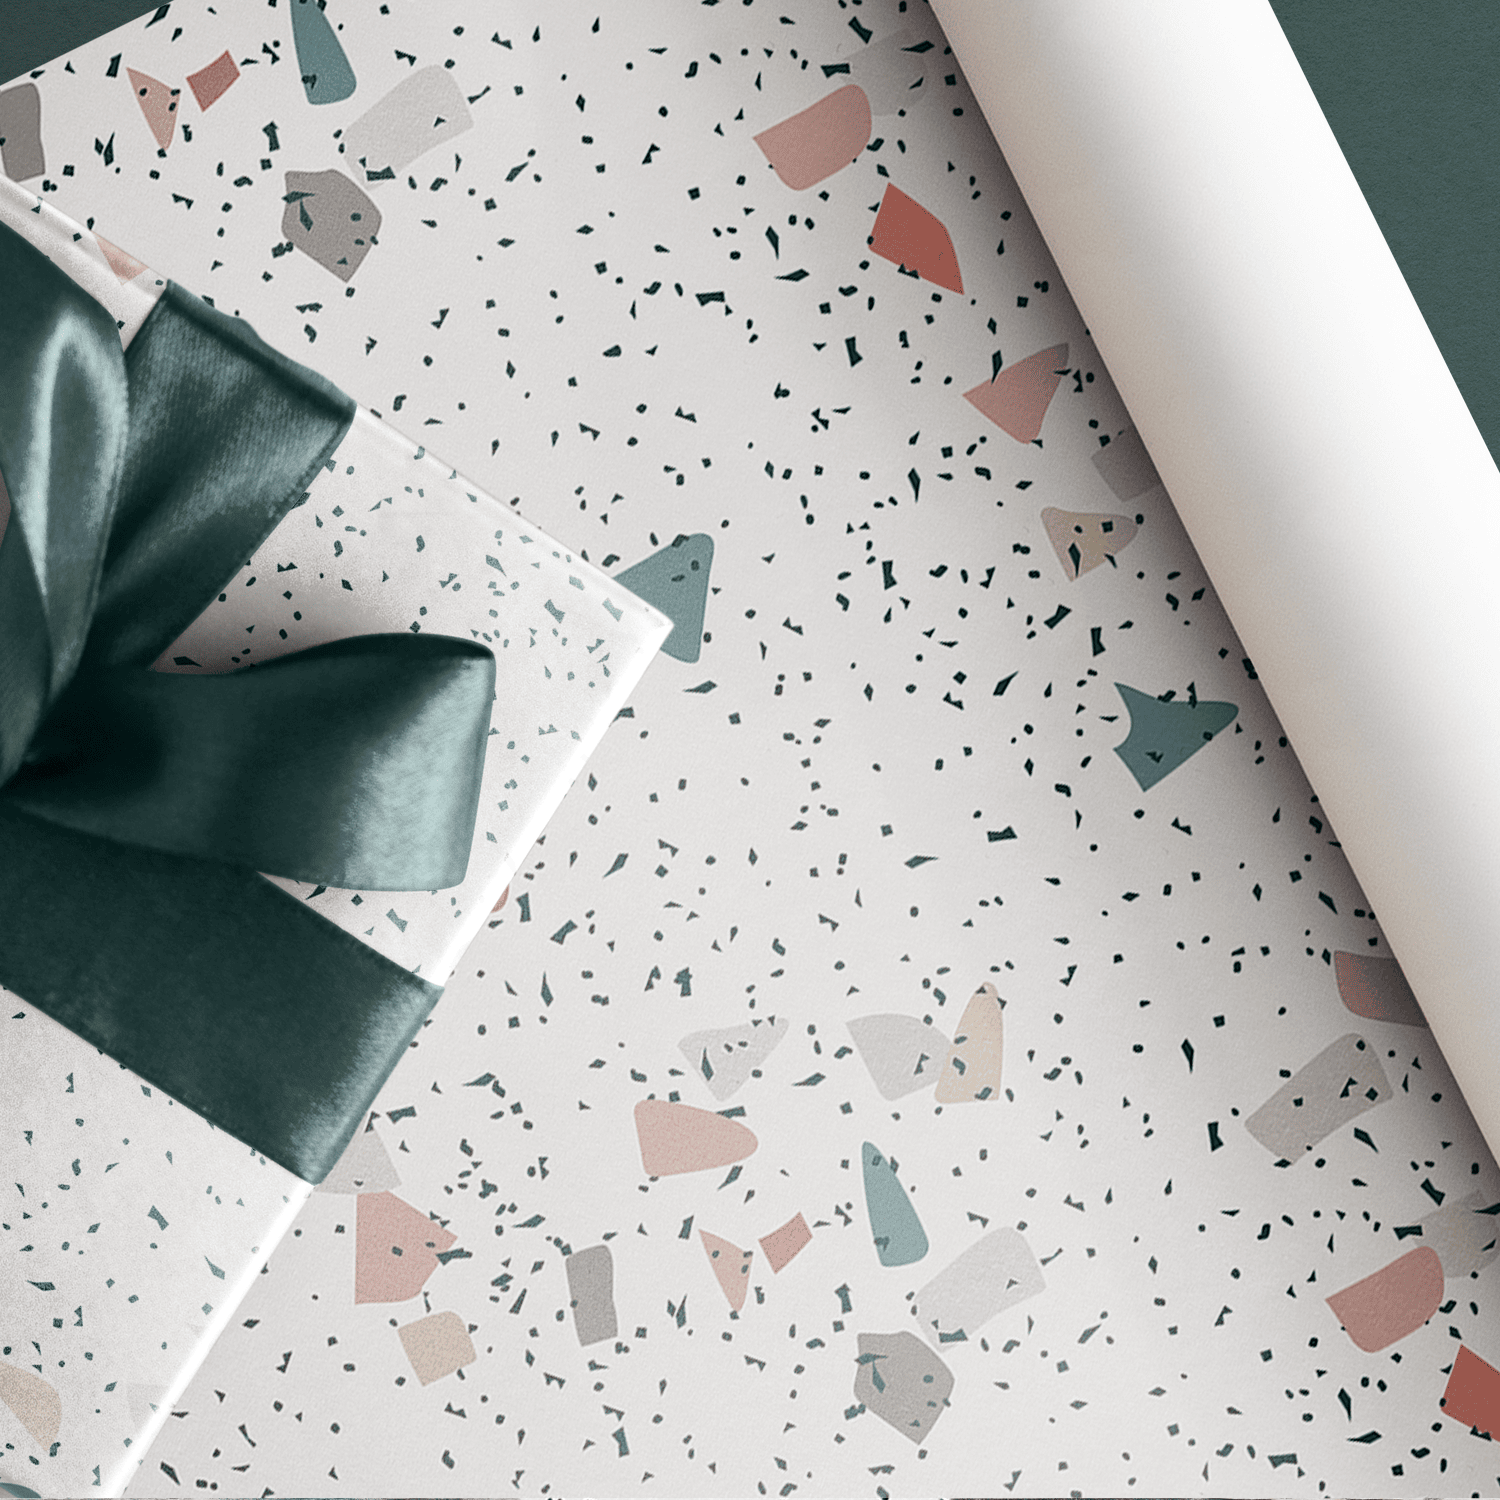 Wrapping paper vs kraft brown paper gift bags for Christmas presents